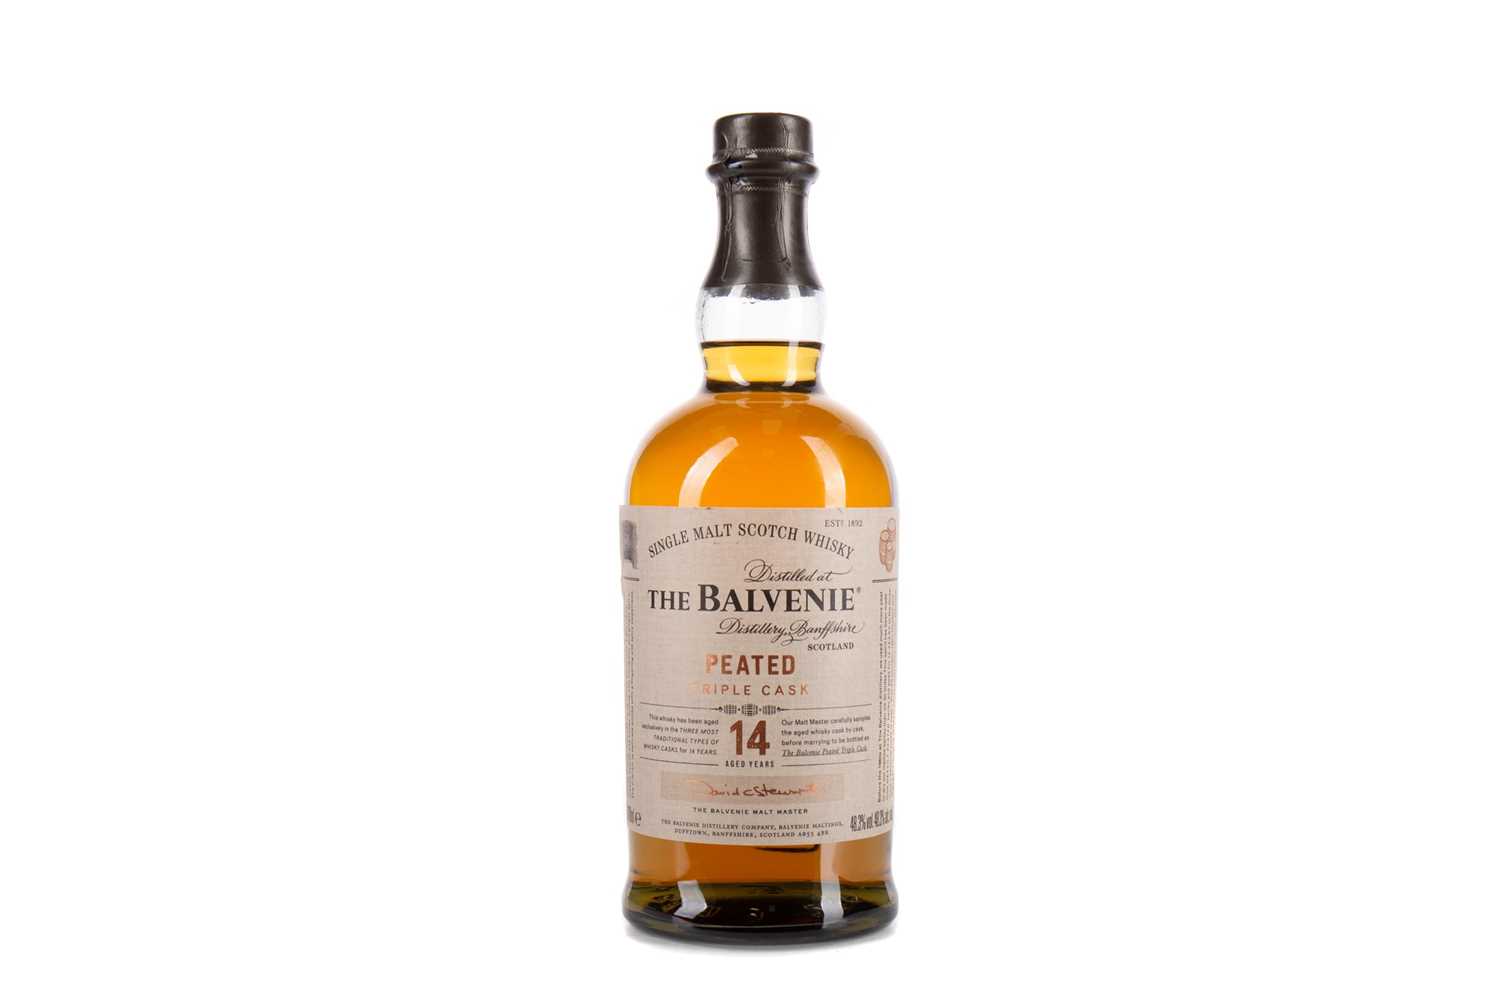 Lot 222 - BALVENIE 14 YEAR OLD PEATED TRIPLE CASK